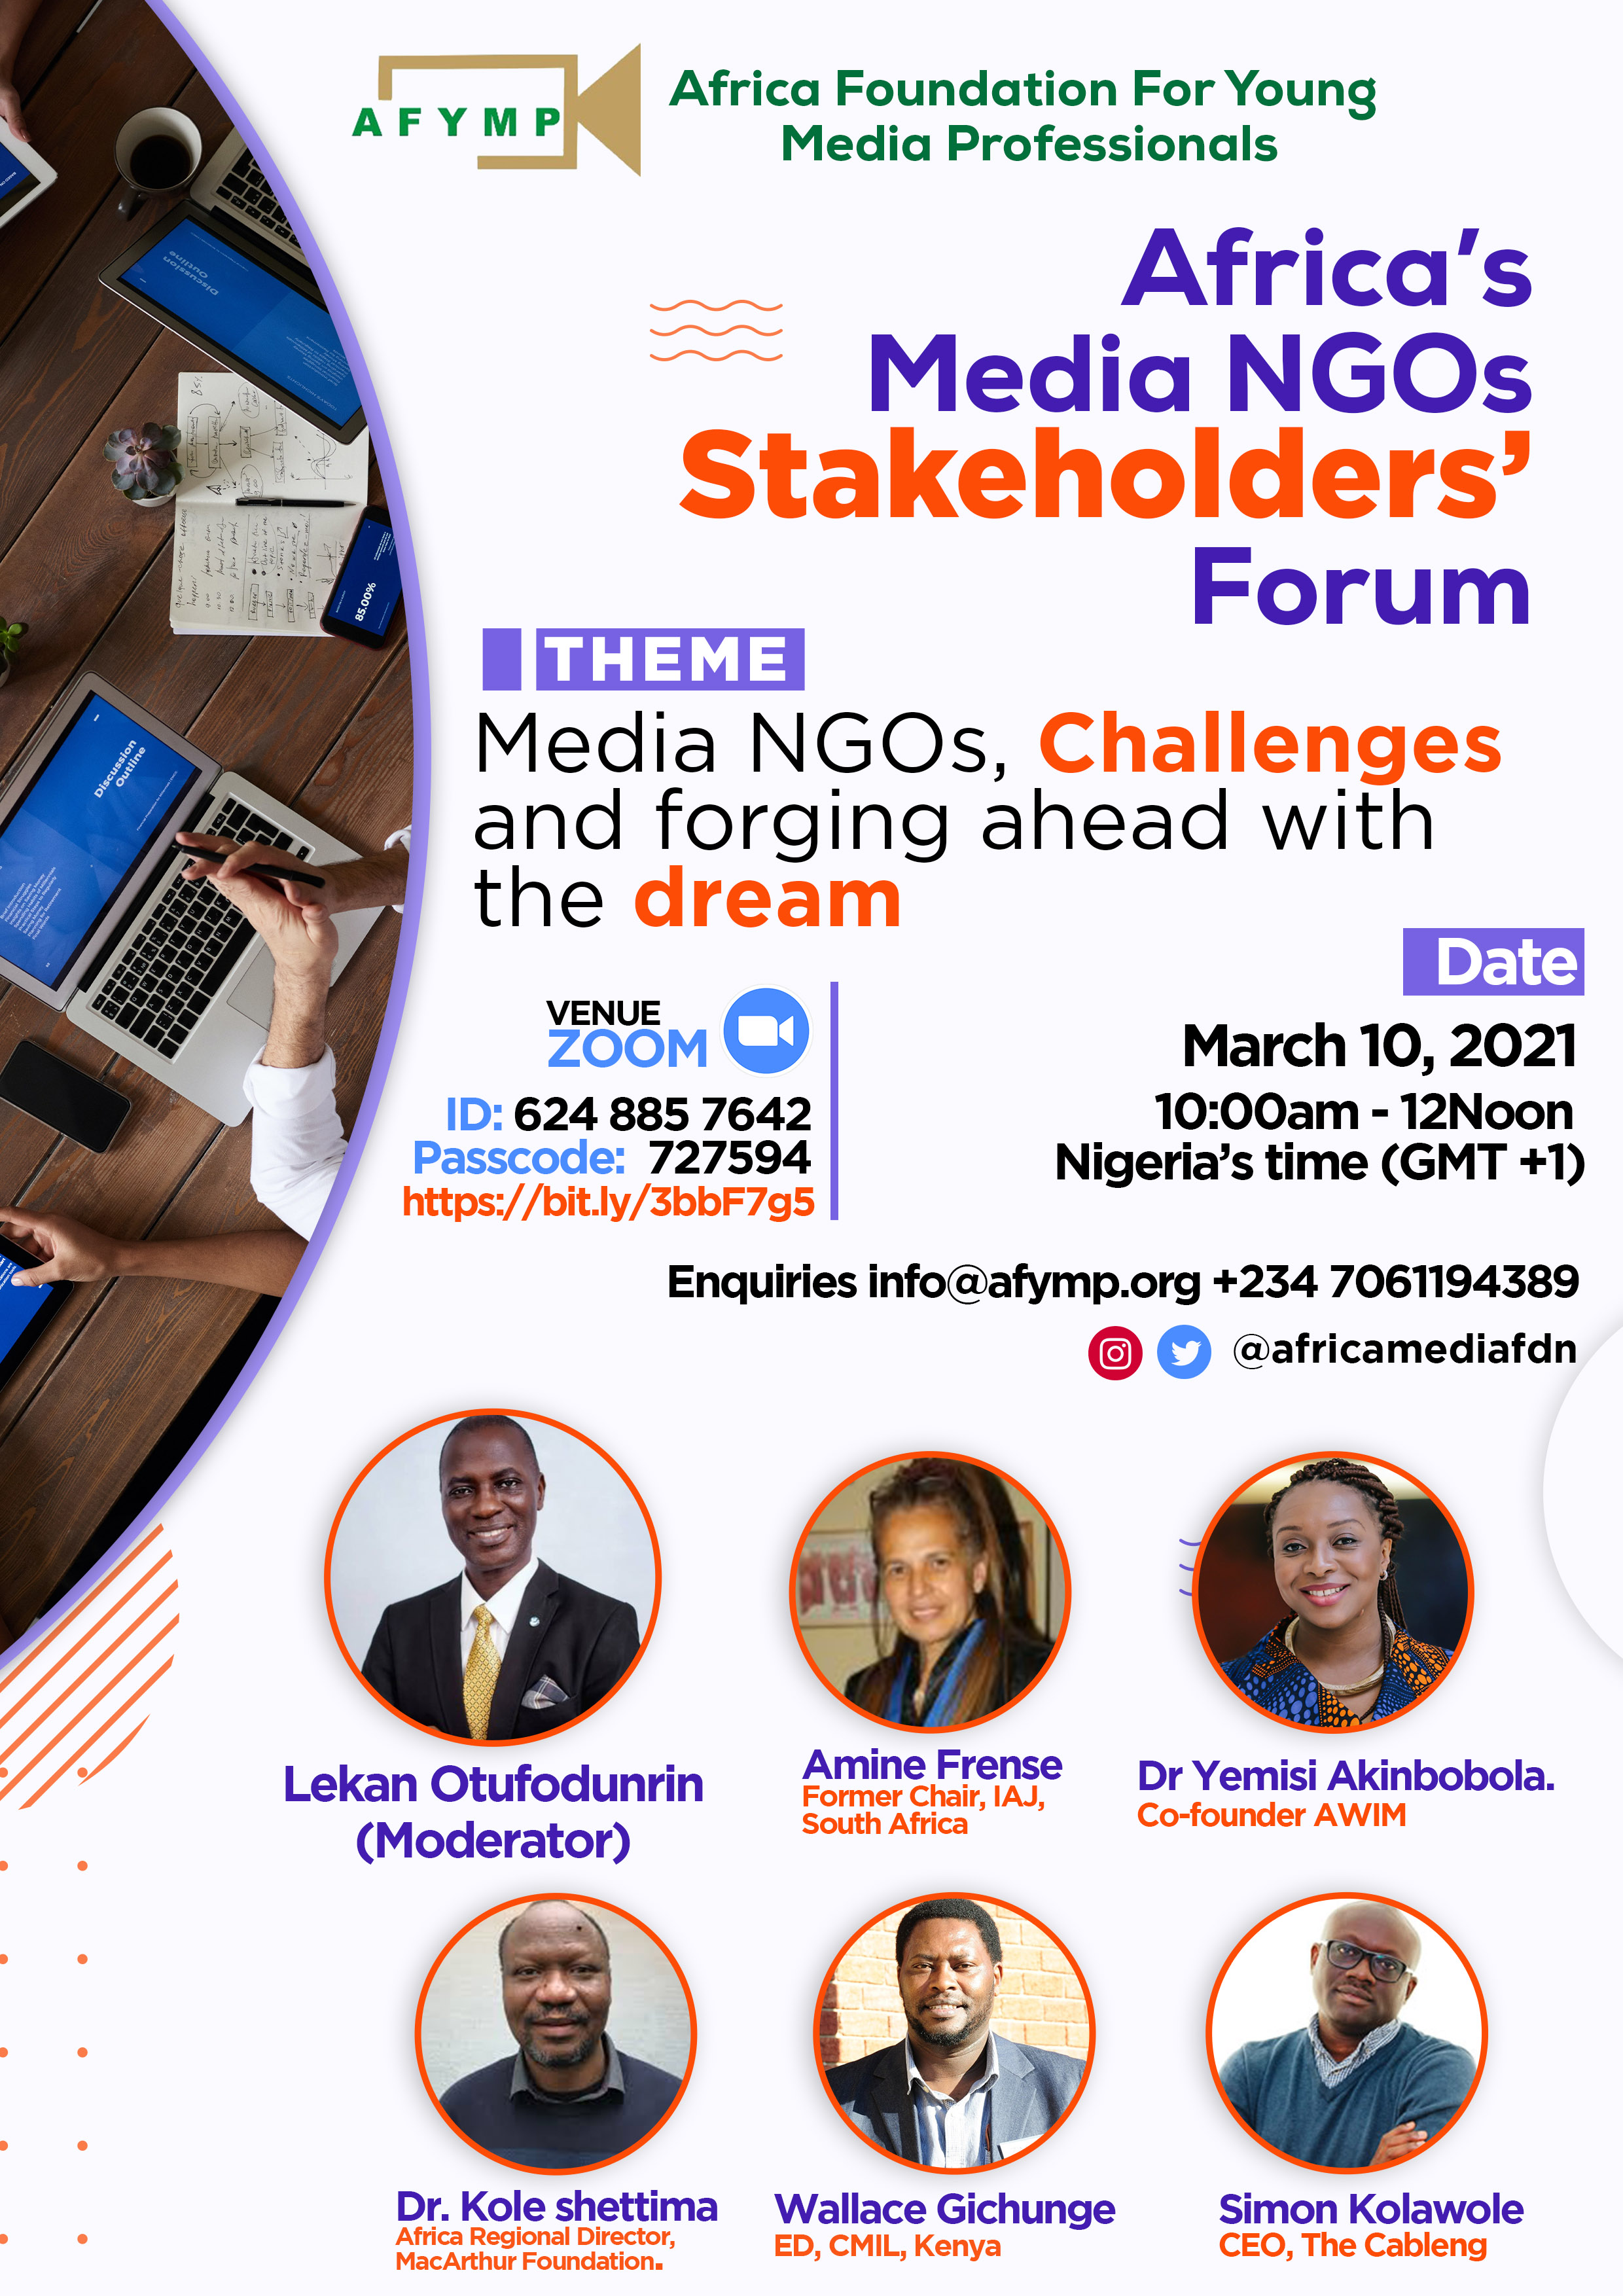 Africa's Media NGOs Stakeholders' Conference 2021, Media NGOs challenges in Africa